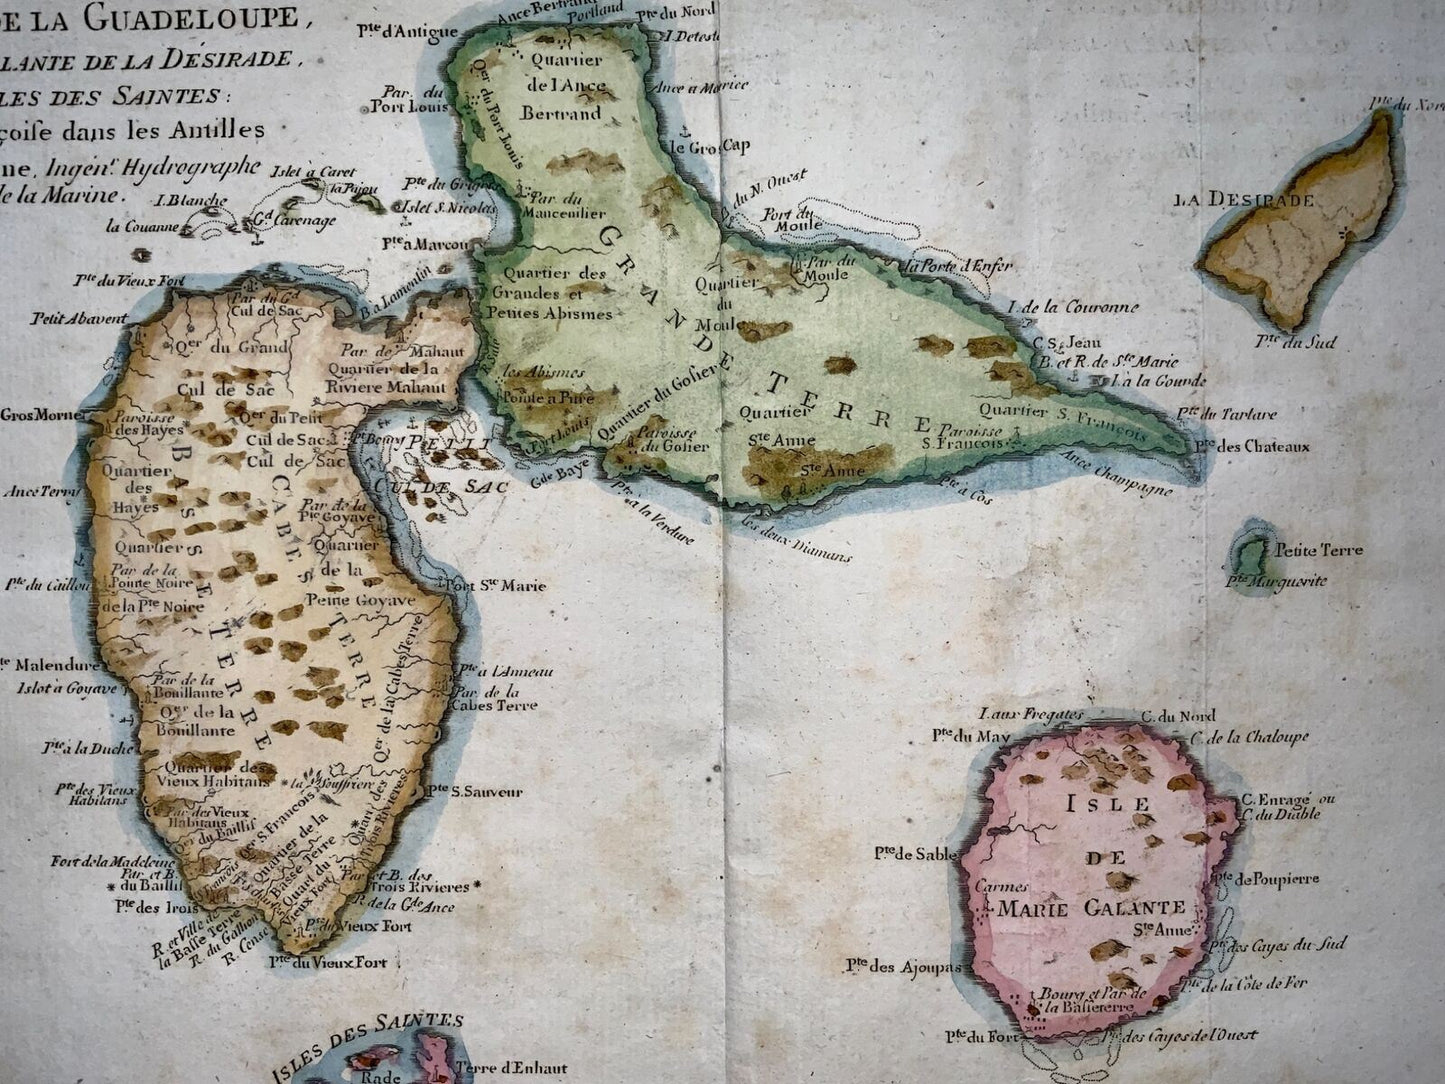 1780 Bonne, Caribbean Islands of Guadeloupe & Martinique hand coloured map